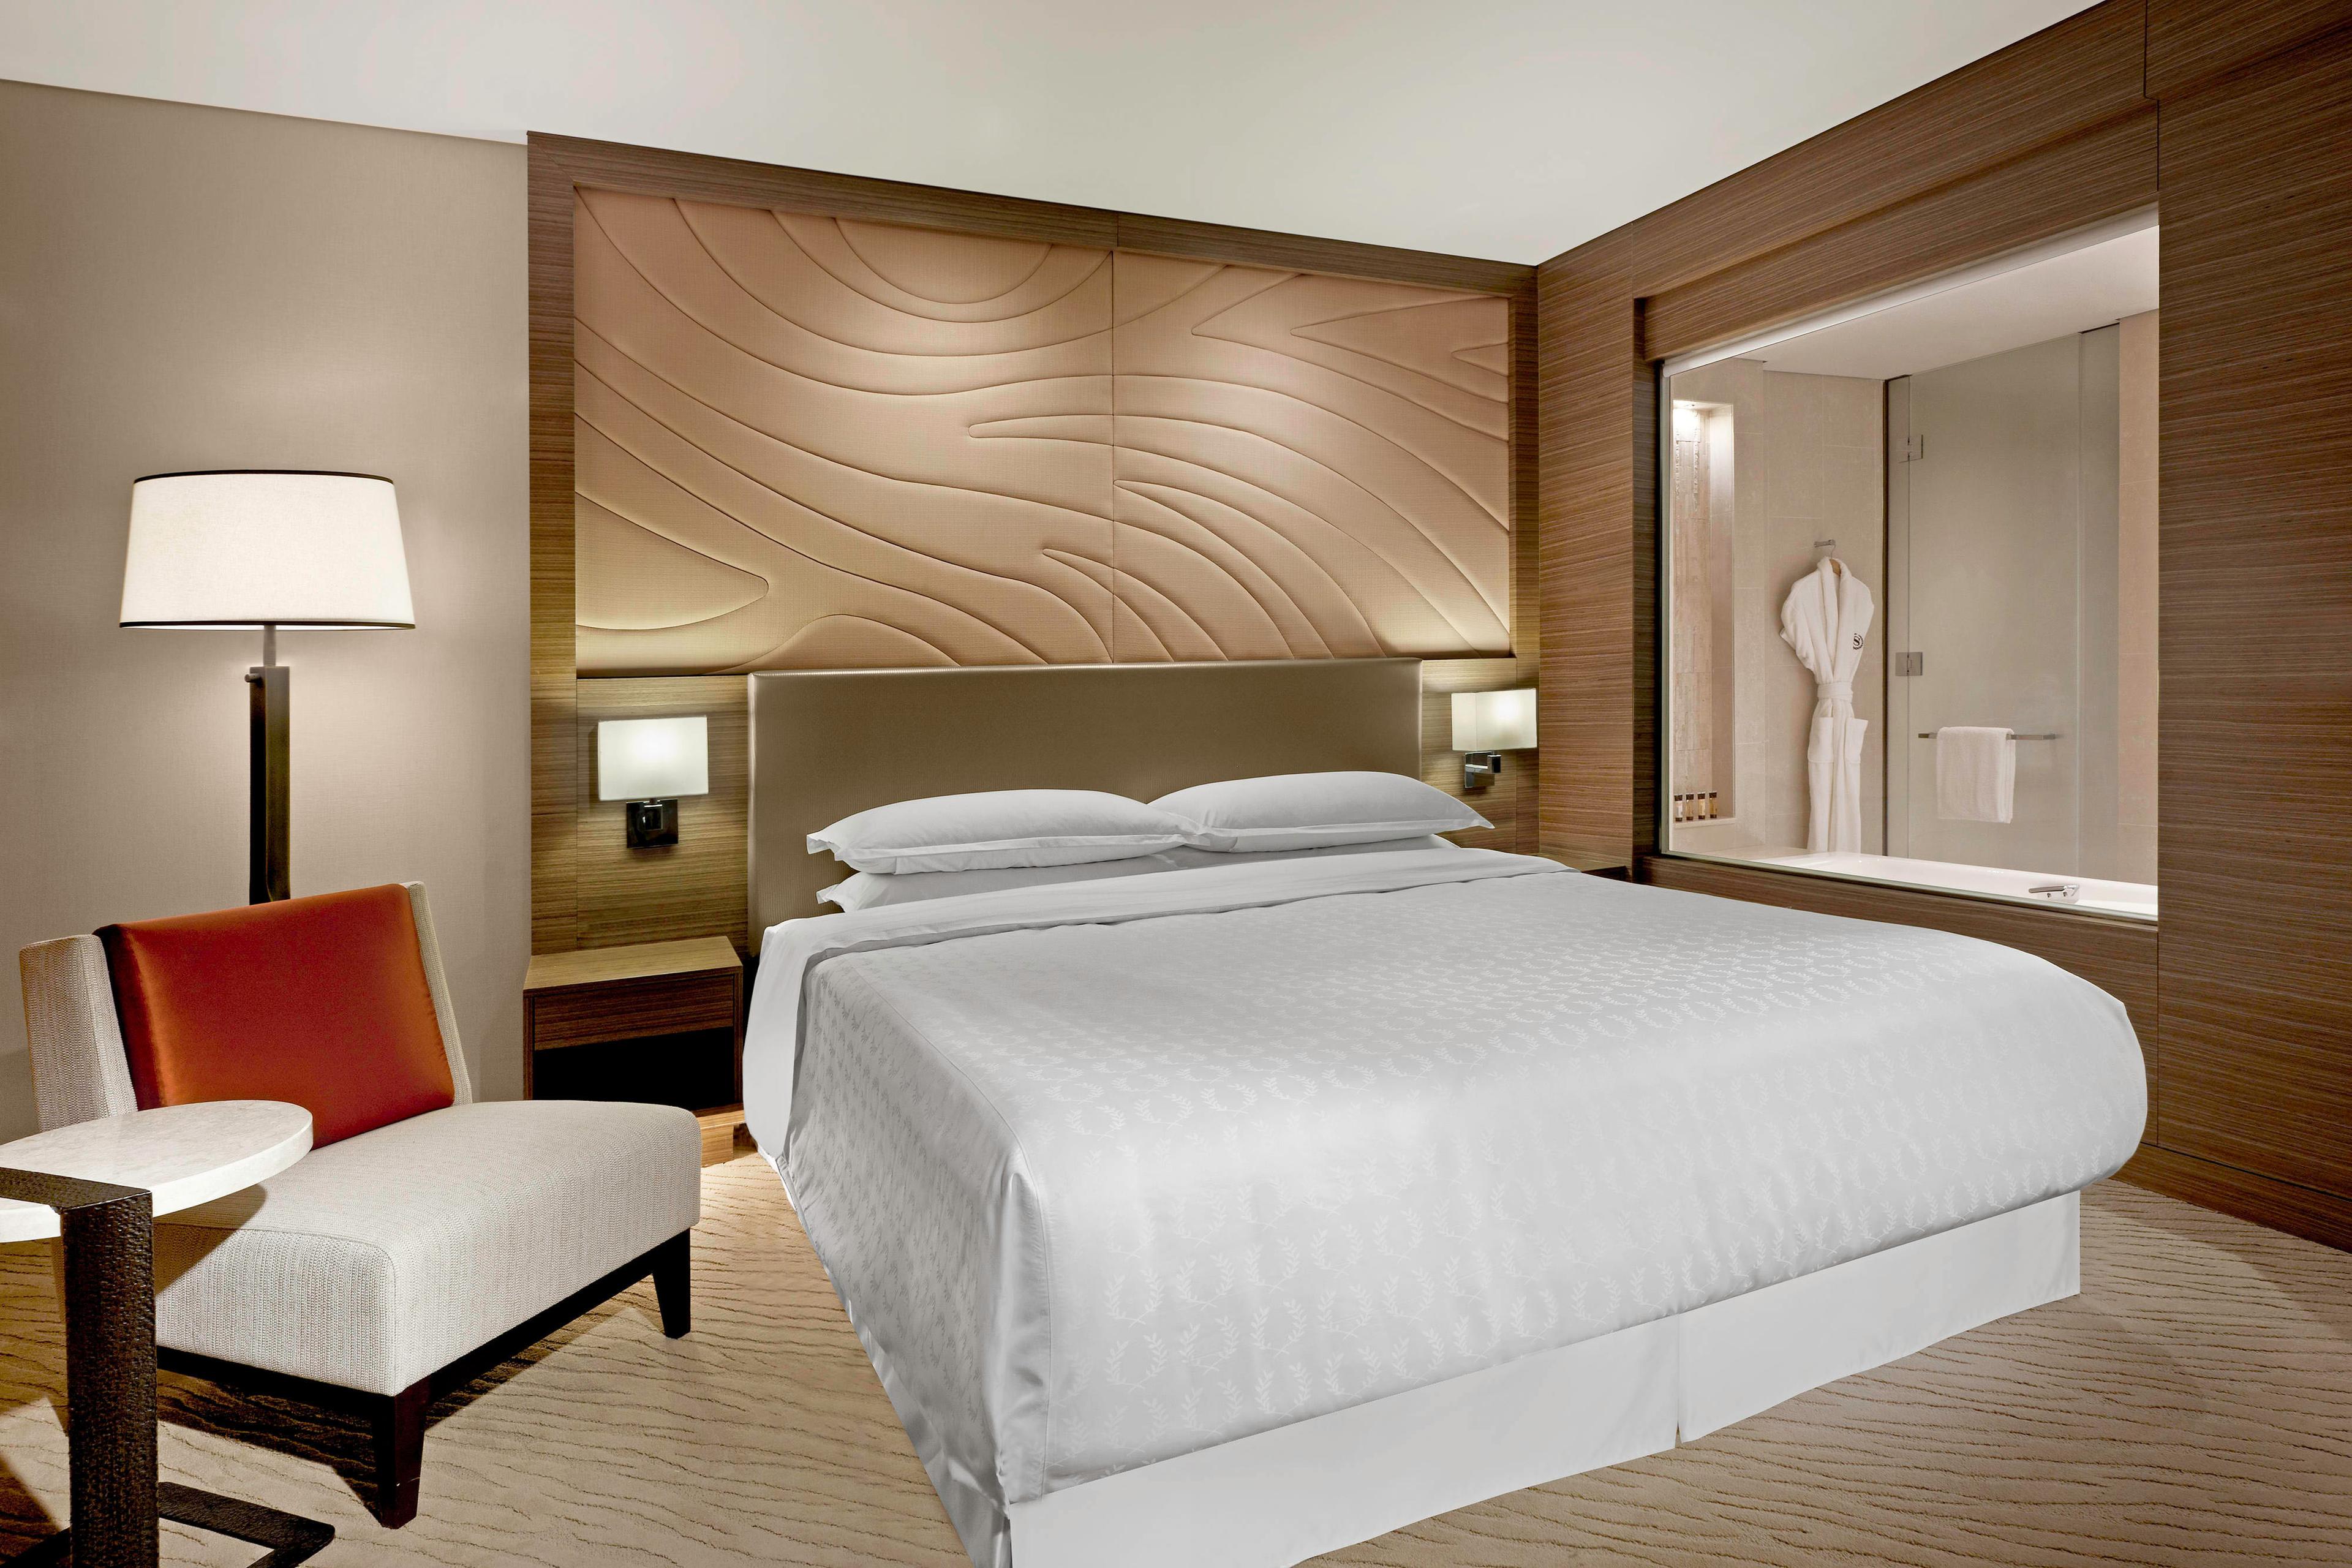 Experience a restful night’s sleep with a king Sheraton Signature Sleep Experience Beds in our modern guest room.